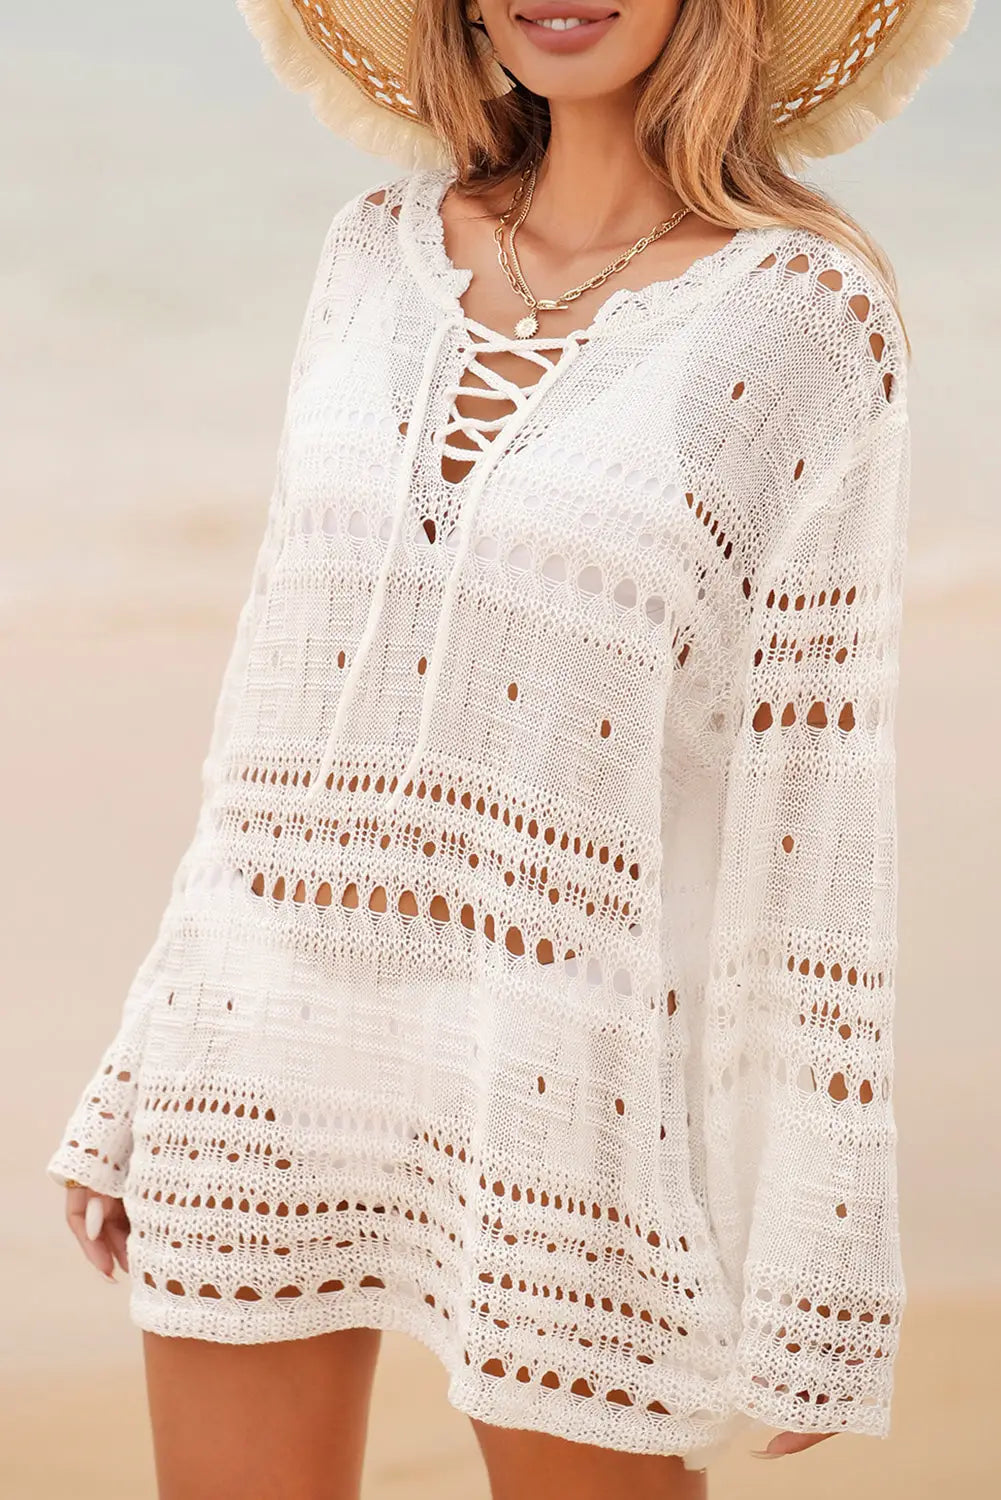 White lace-up long sleeve cover up - s / 100% polyester - beach cover-ups